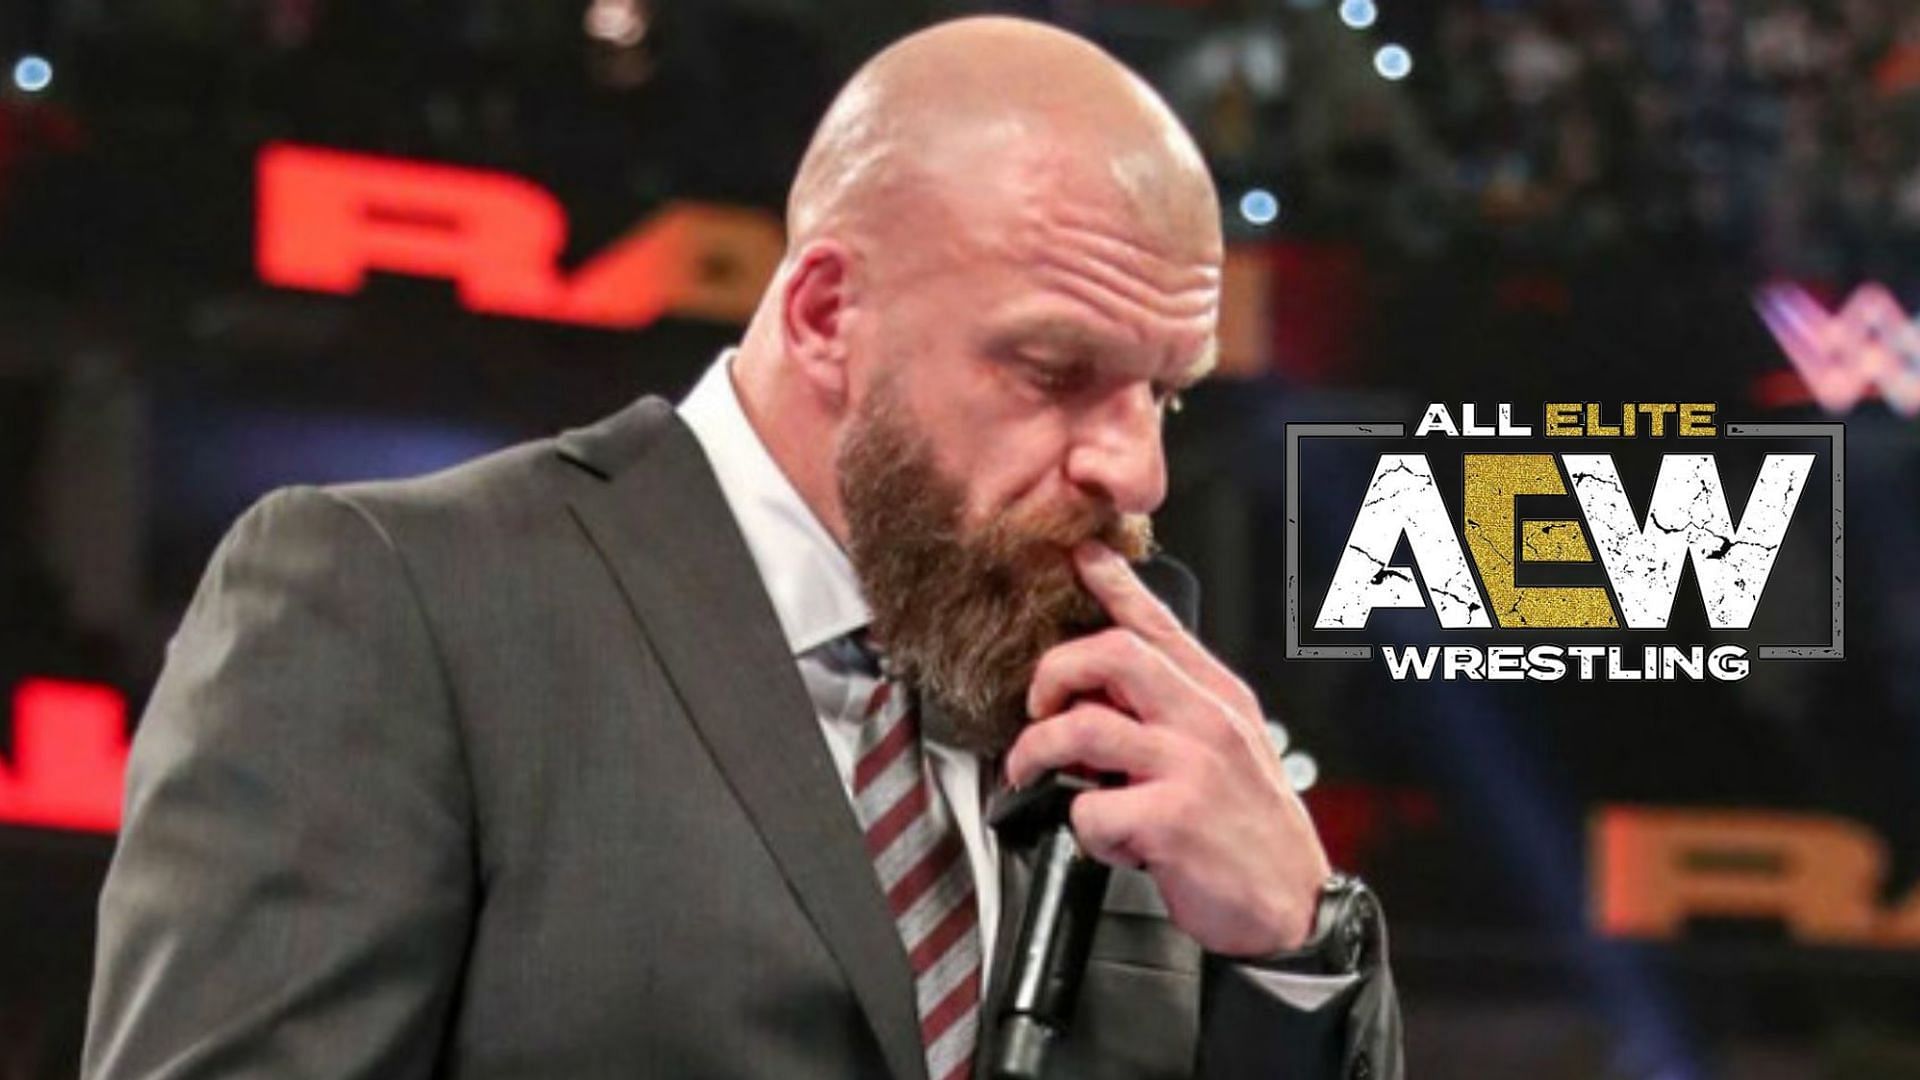 An absent AEW star could potentially make his way back to WWE under Triple H.